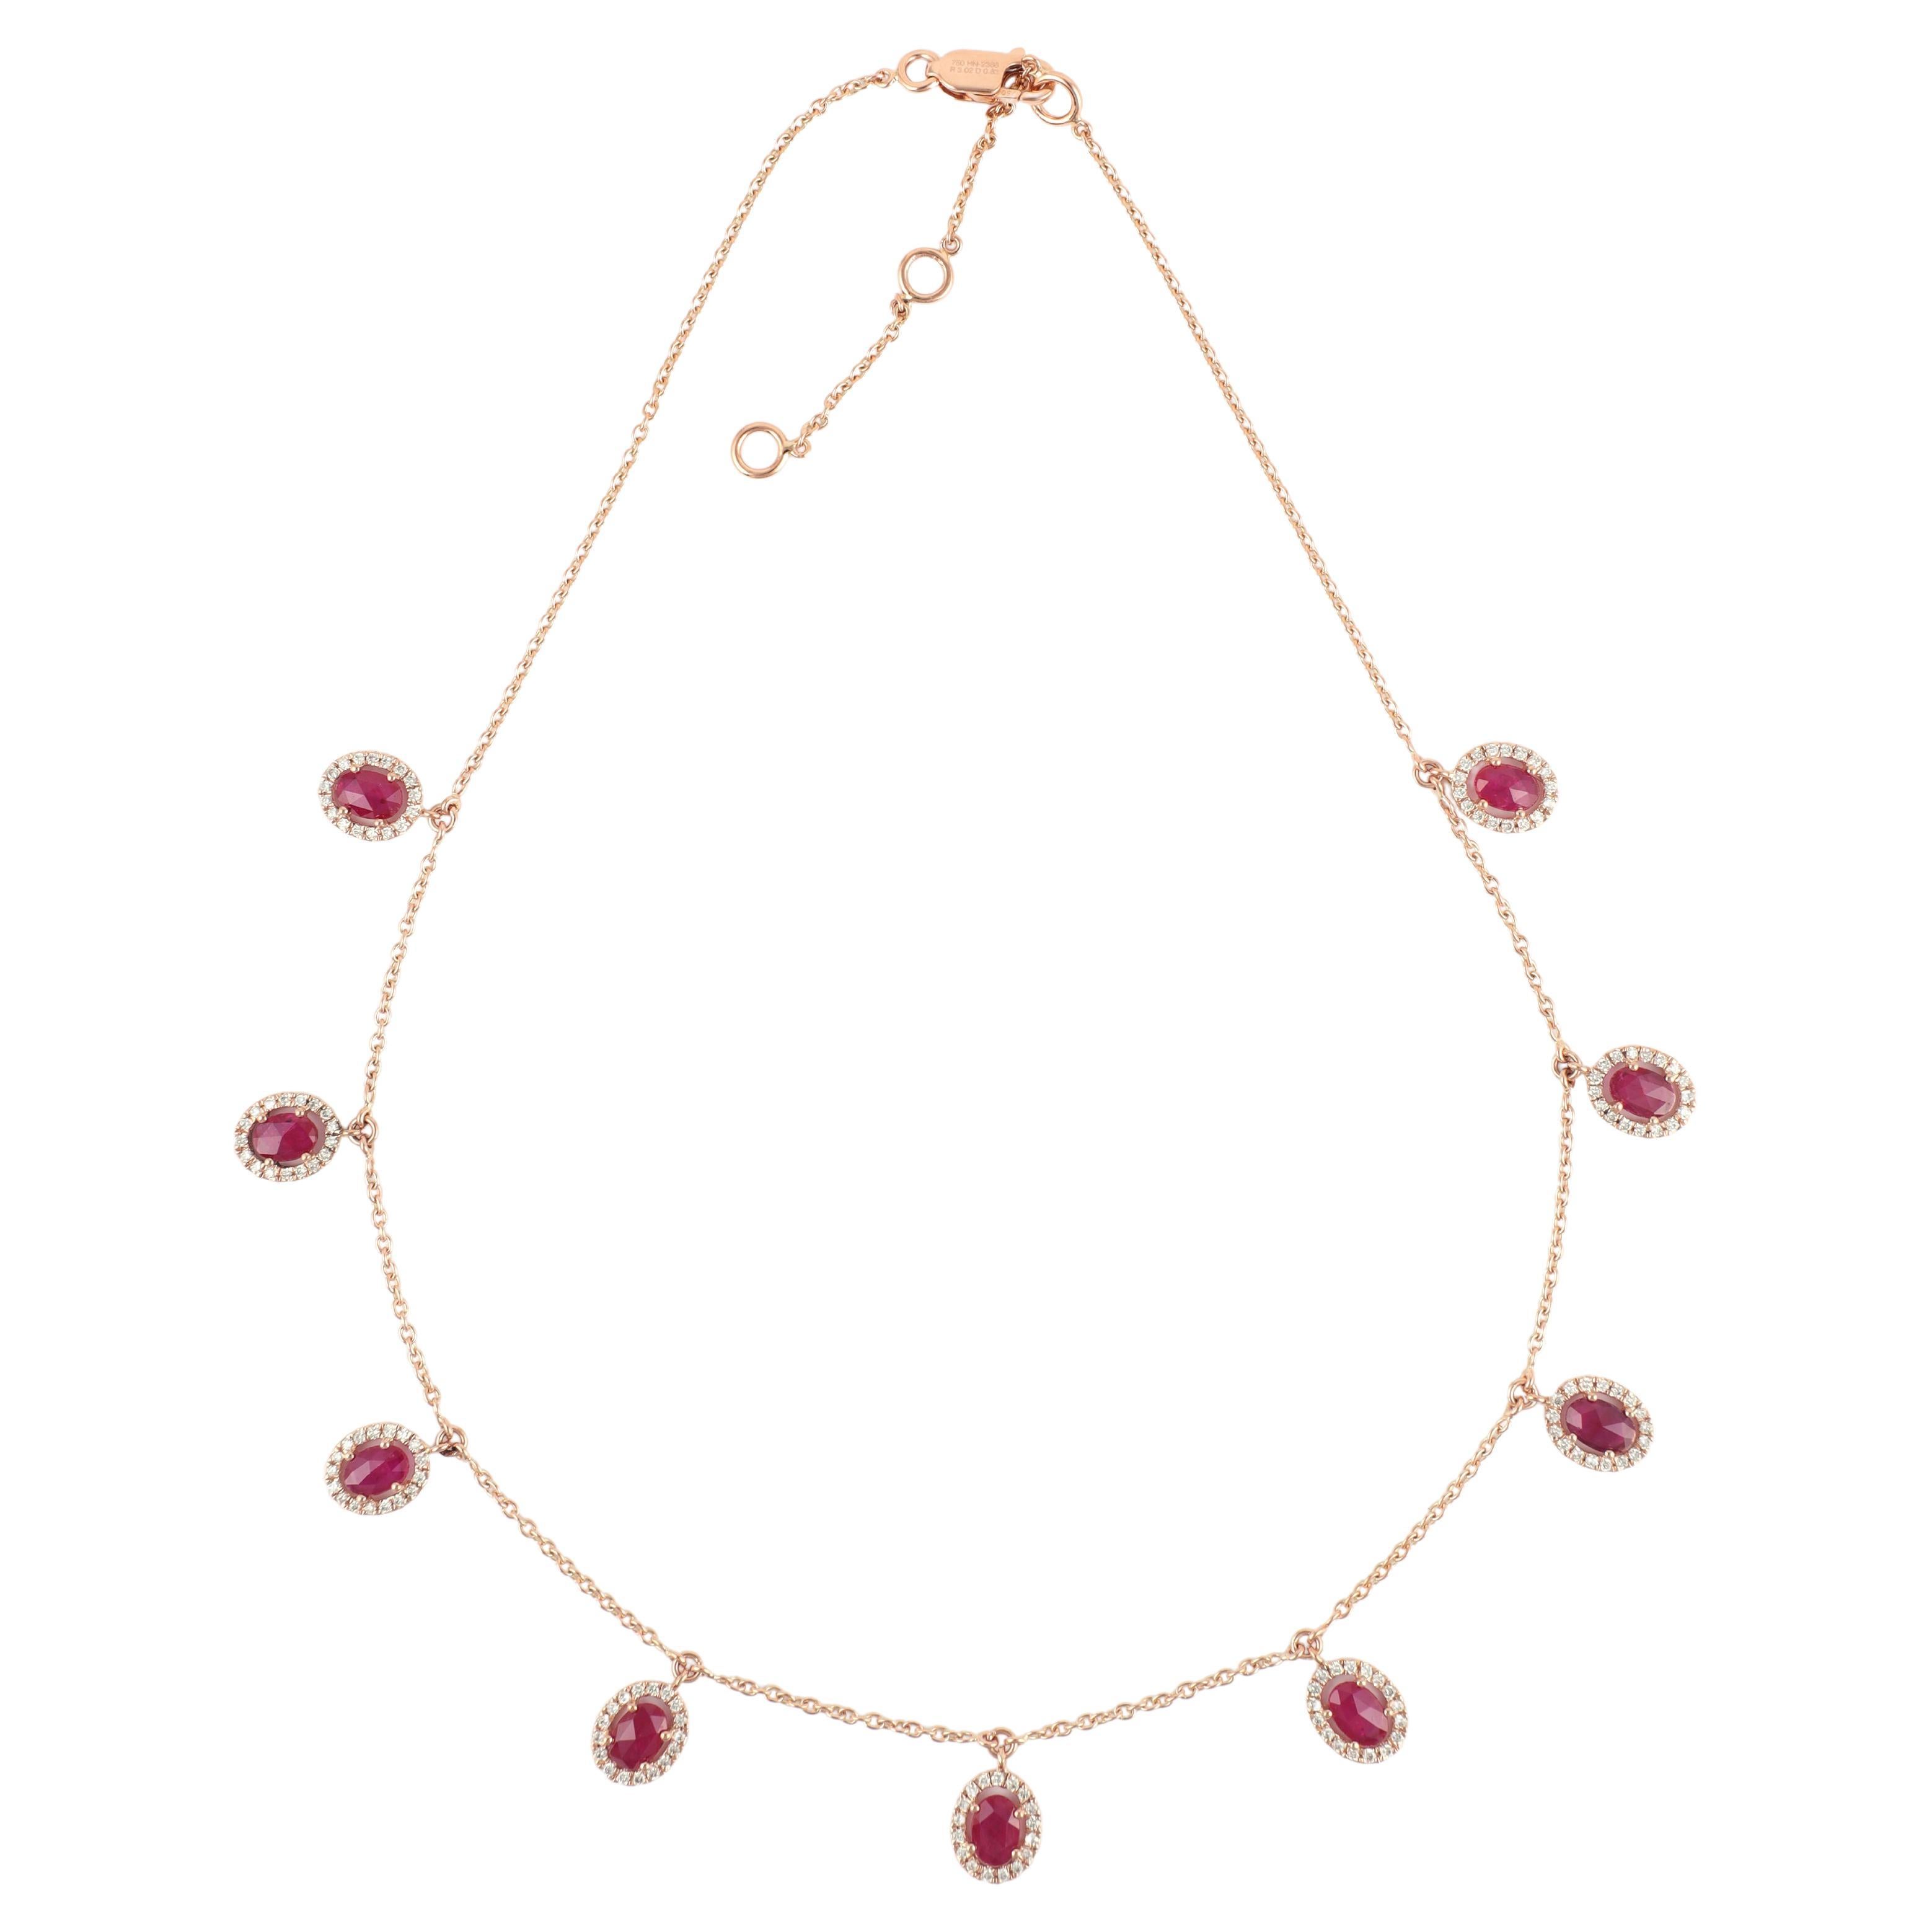 3.02 Carats Ruby & 0.83 Carats Diamond Chain Necklace in 18k Rose Gold